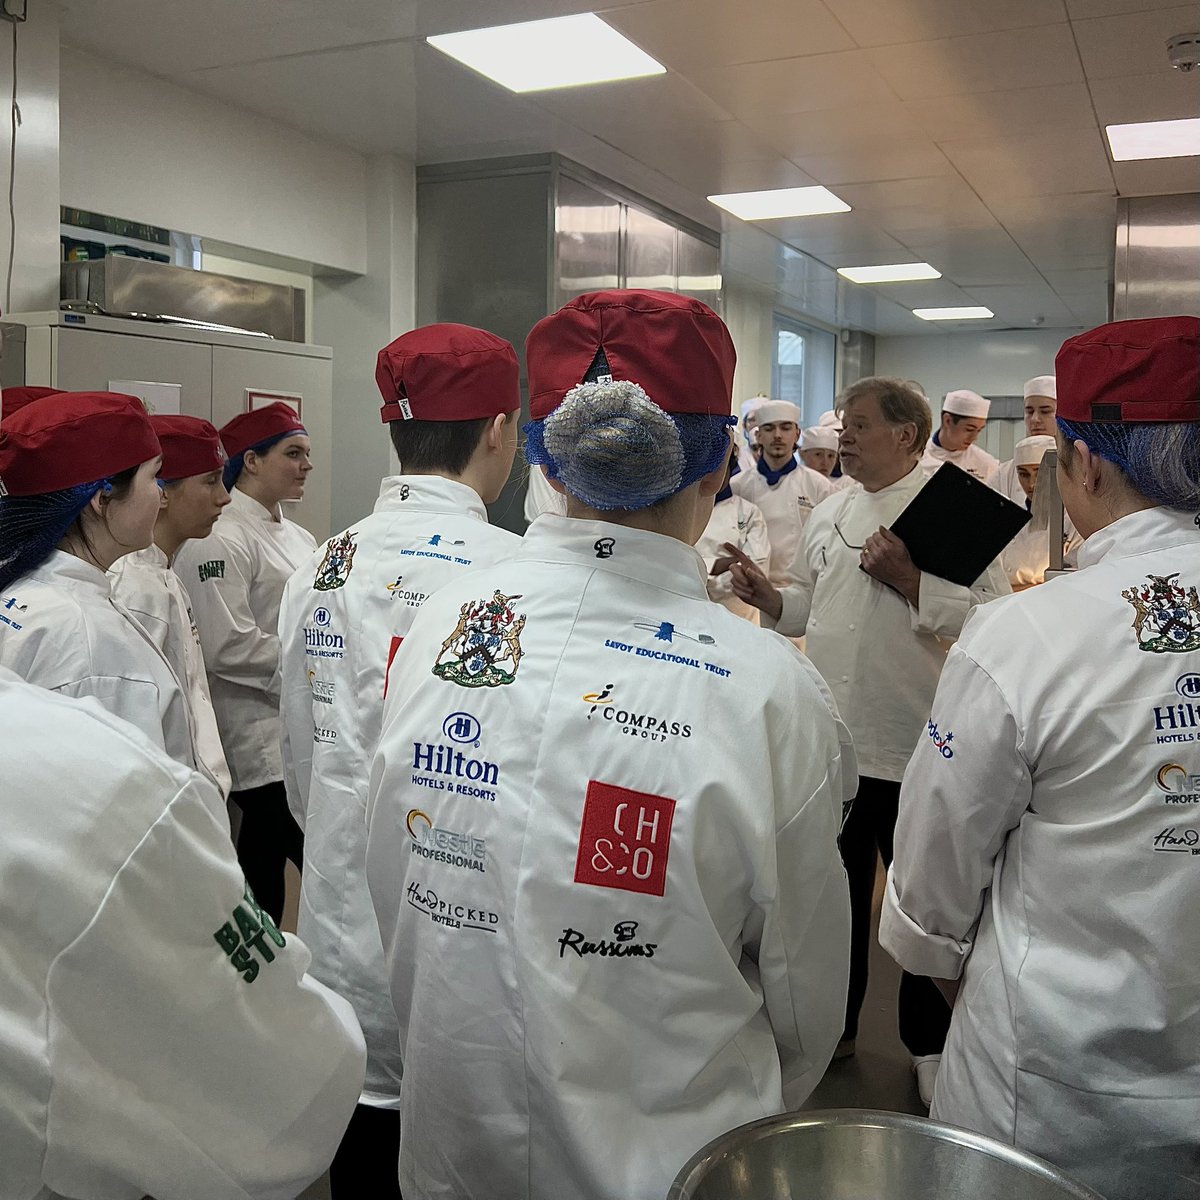 Steve Munkley welcomes our 12 eager chefs to the competition…💬 #FutureChef25Years #SpringboardFutureChef